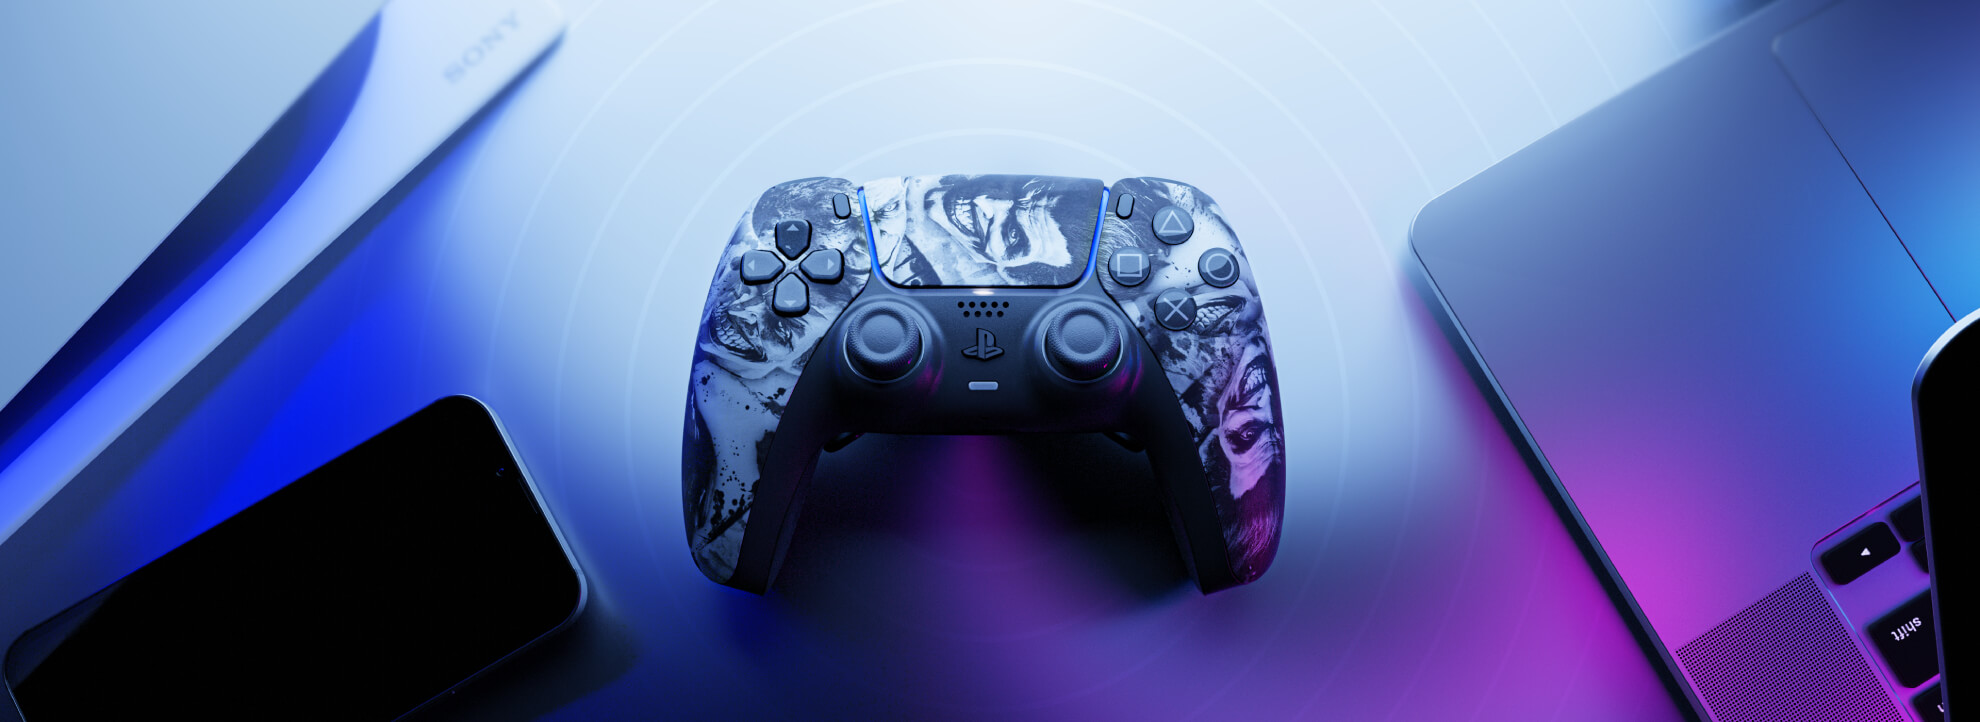 Create Your Own PS5 Controller! Custom PS5 Controller Design -  Aimcontrollers